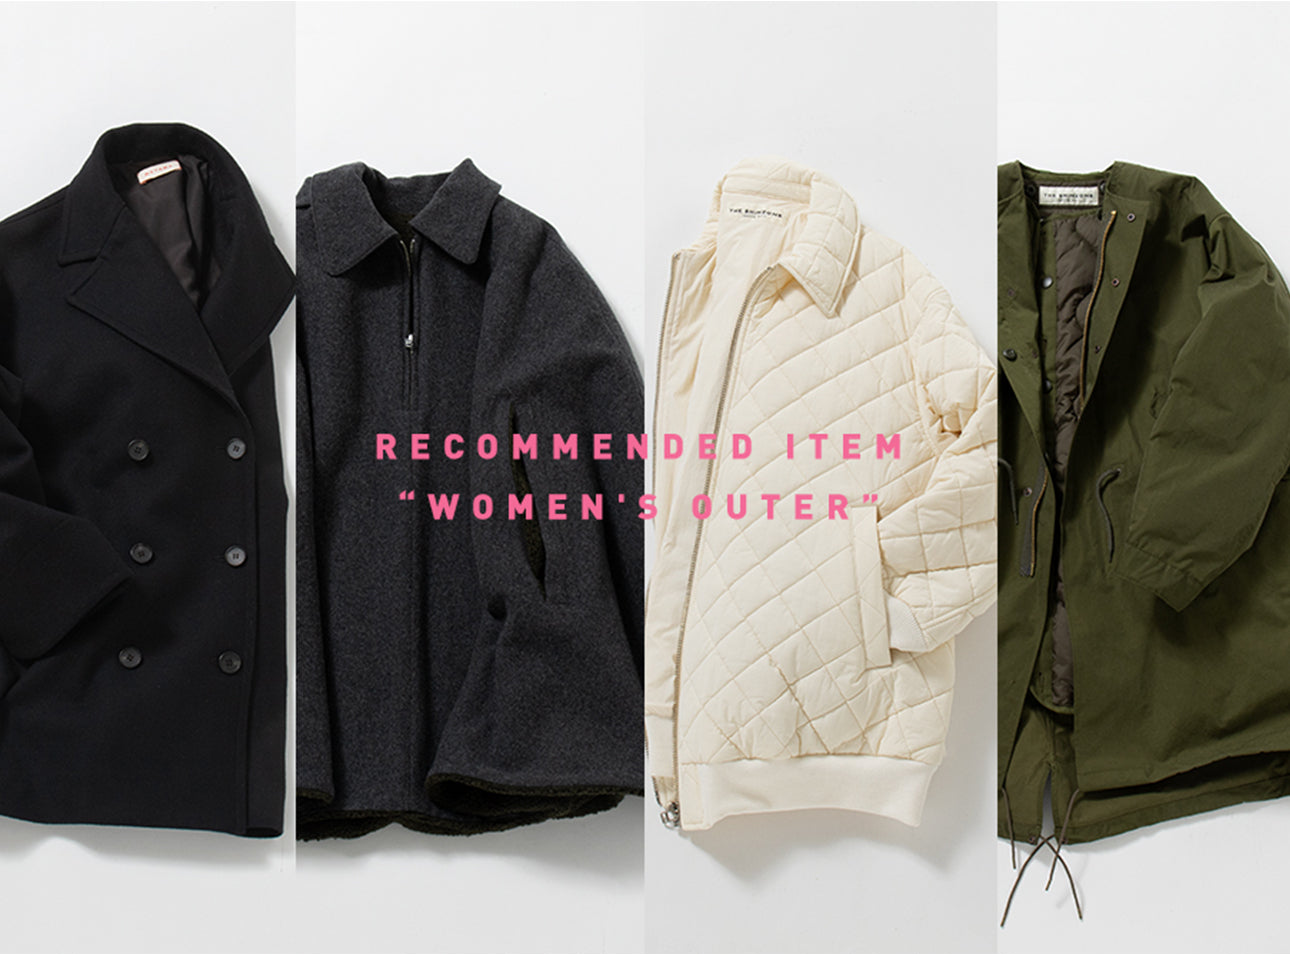 RECOMMENDED ITEM “WOMEN’S OUTER”